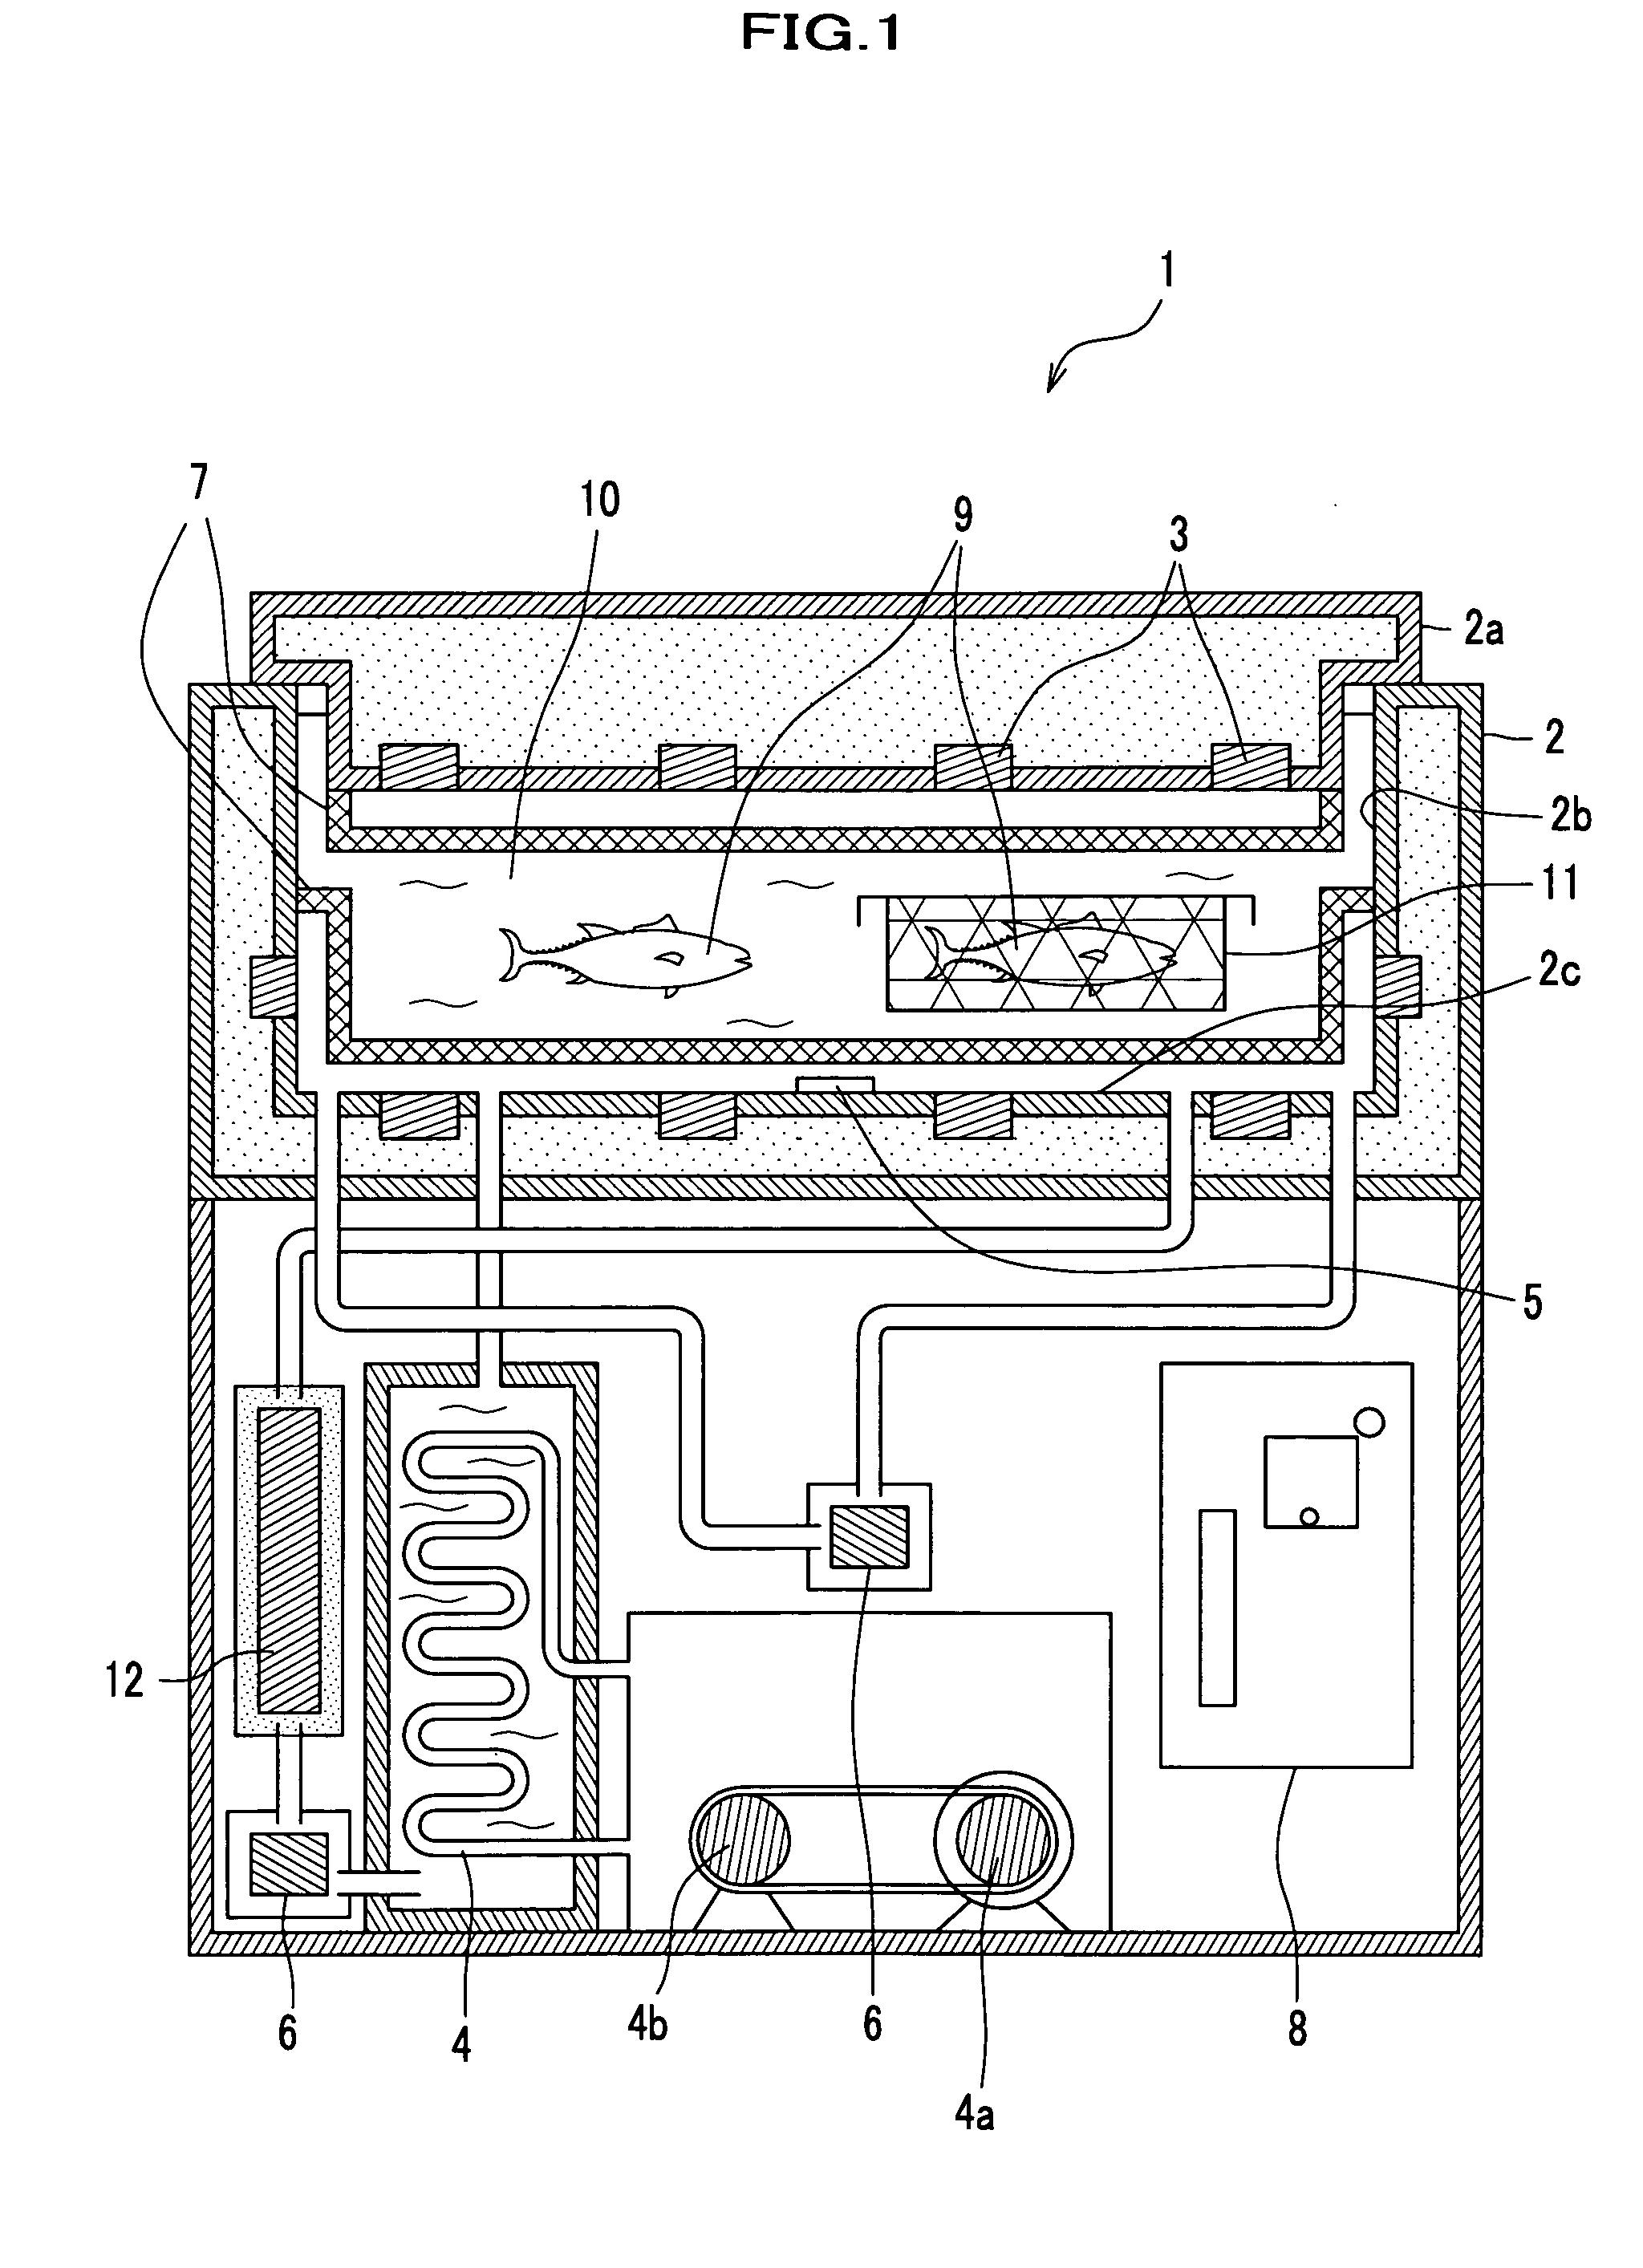 Apparatus for cooling food under water and maintaining water temperature therefor